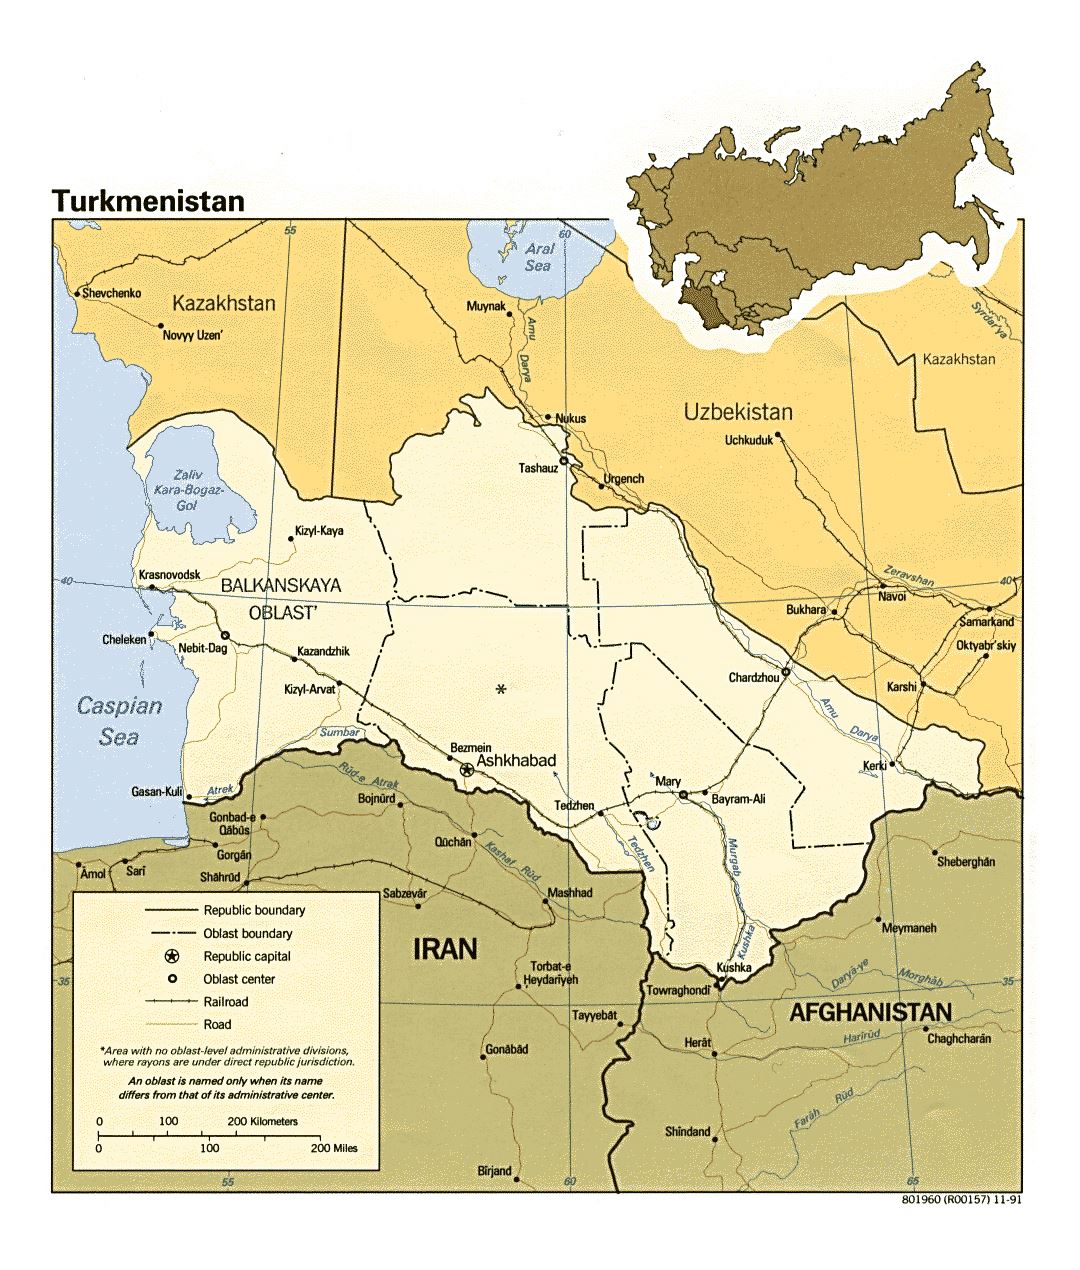 Detailed political and administrative map of Turkmenistan with roads, railroads and major cities - 1991